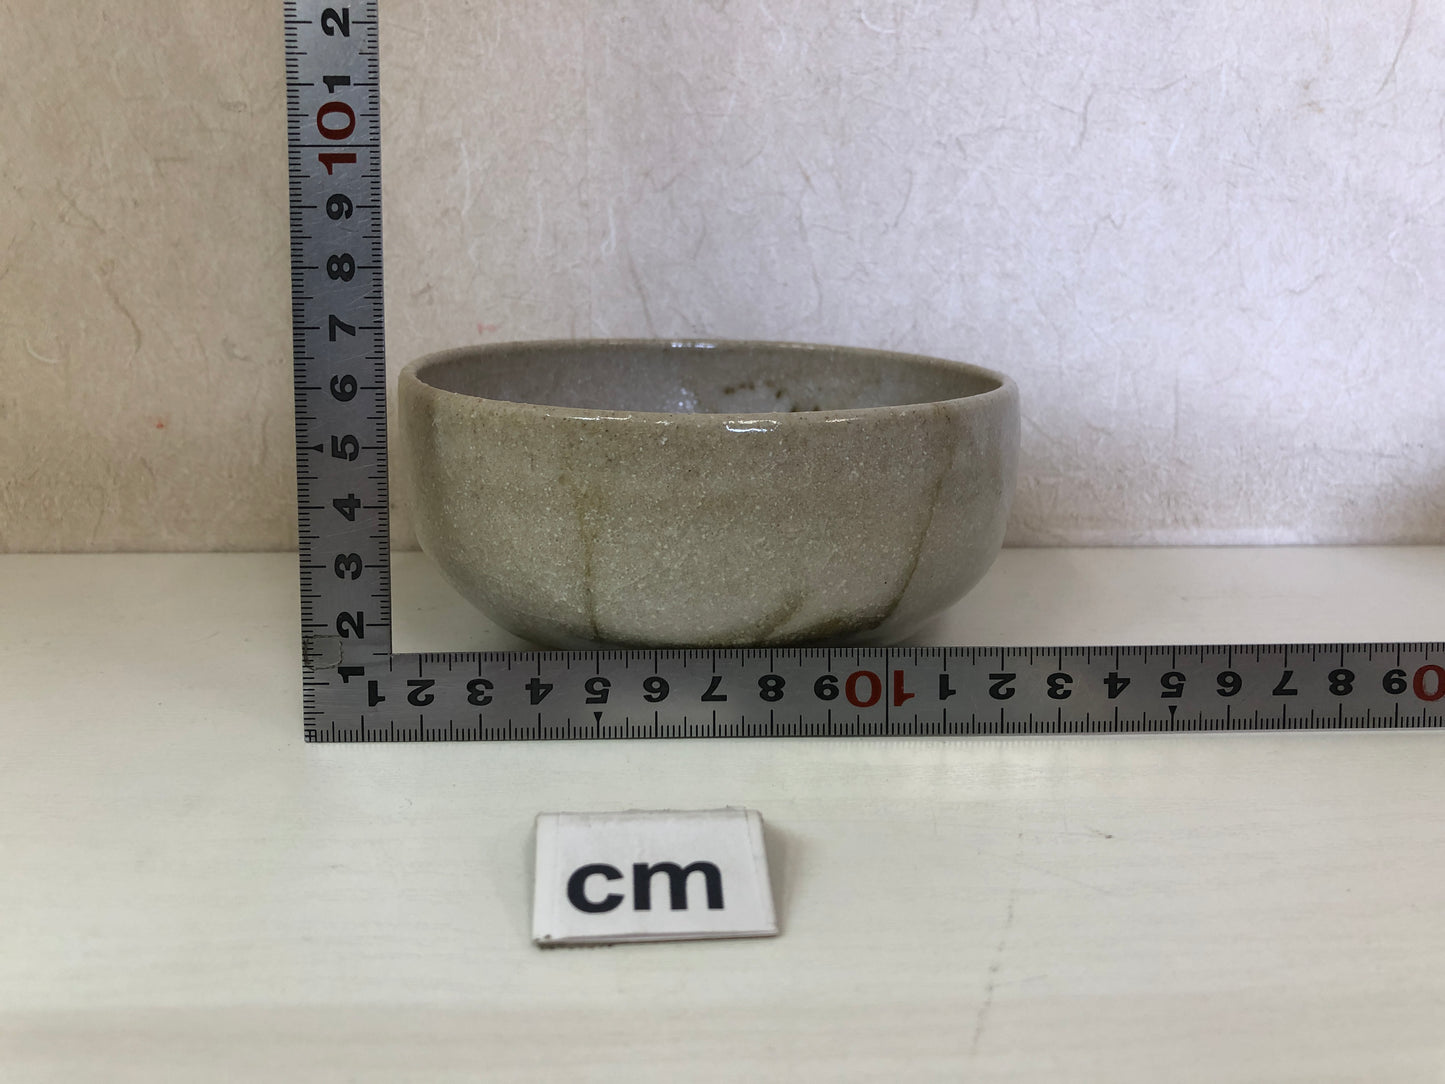 Y4442 CHAWAN Iga-ware signed Japan antique tea ceremony pottery bowl cup vessel